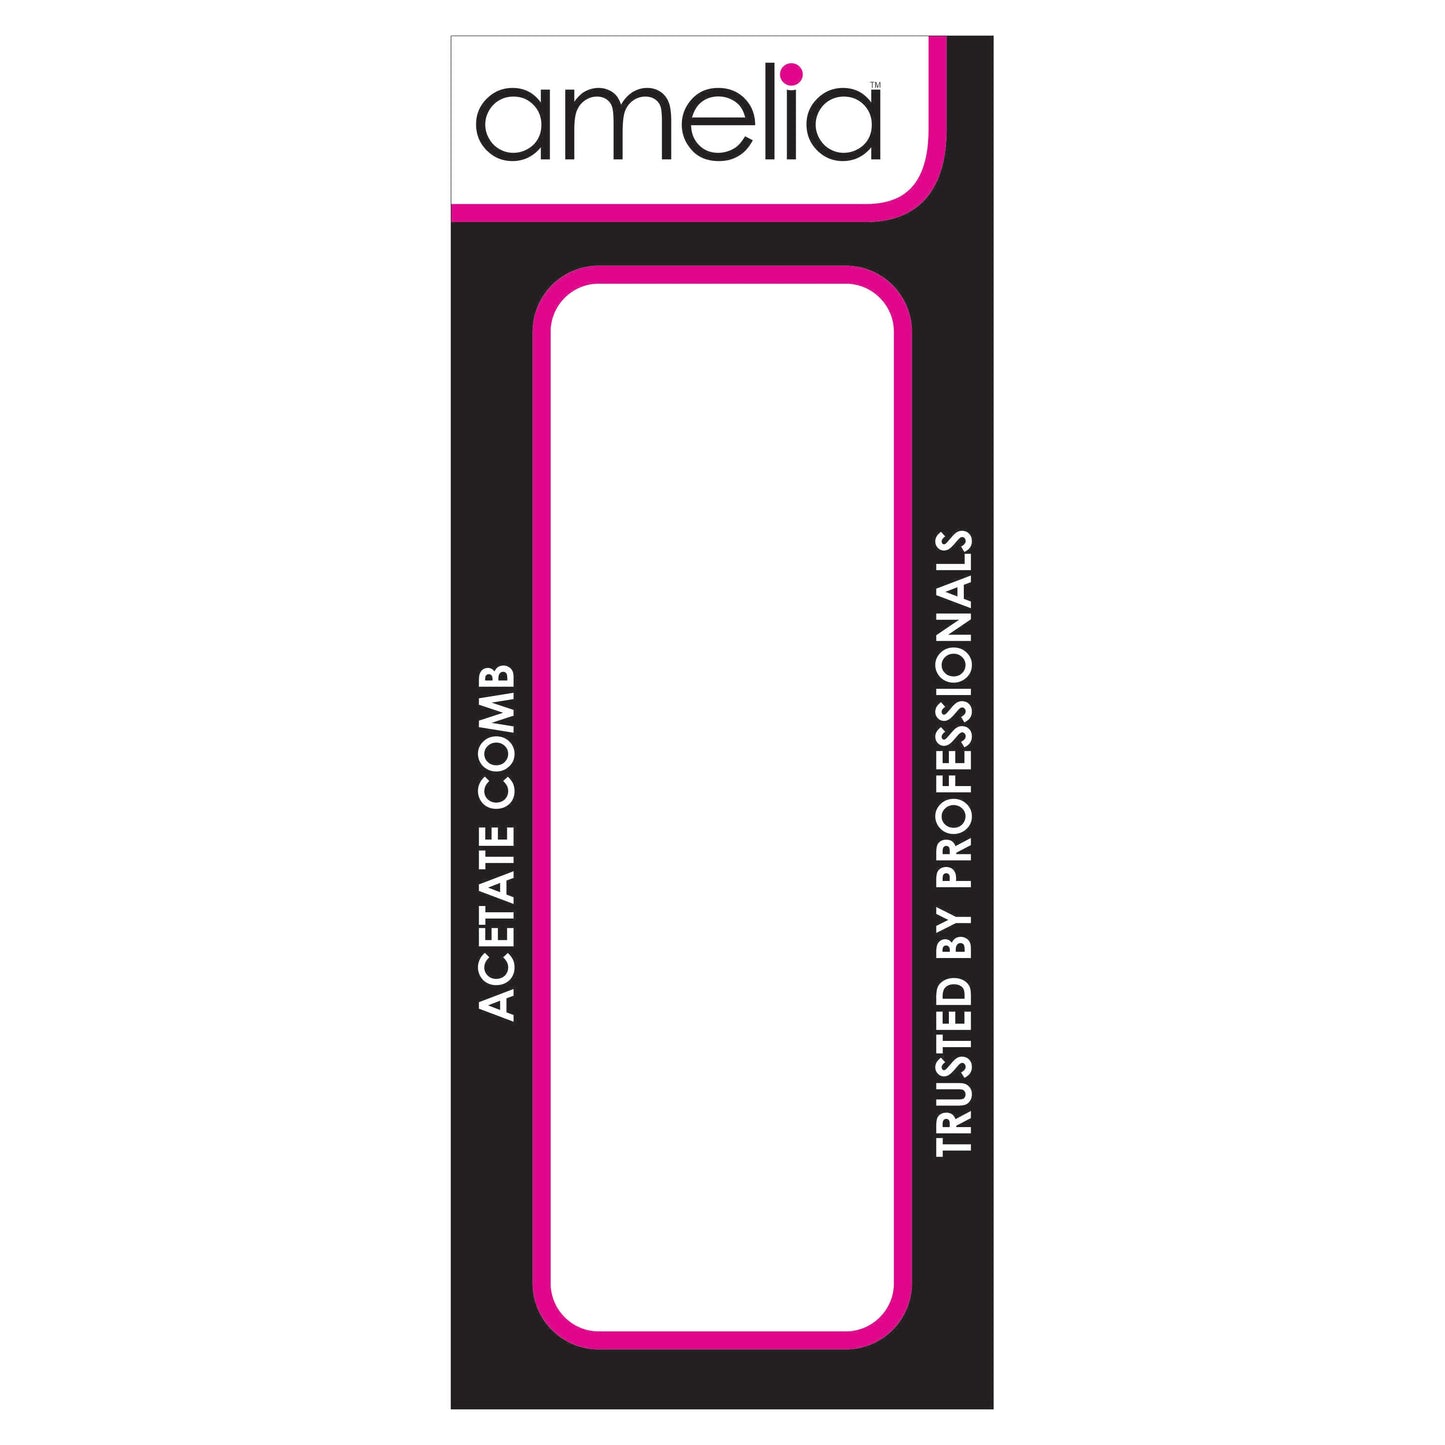 Amelia Beauty Cellulose Acetate 7in Styling Comb, Handmade, Smooth Edges, Eco-Friendly Plant Based Material, Fine and Course Teeth - Tortoise Shell Color